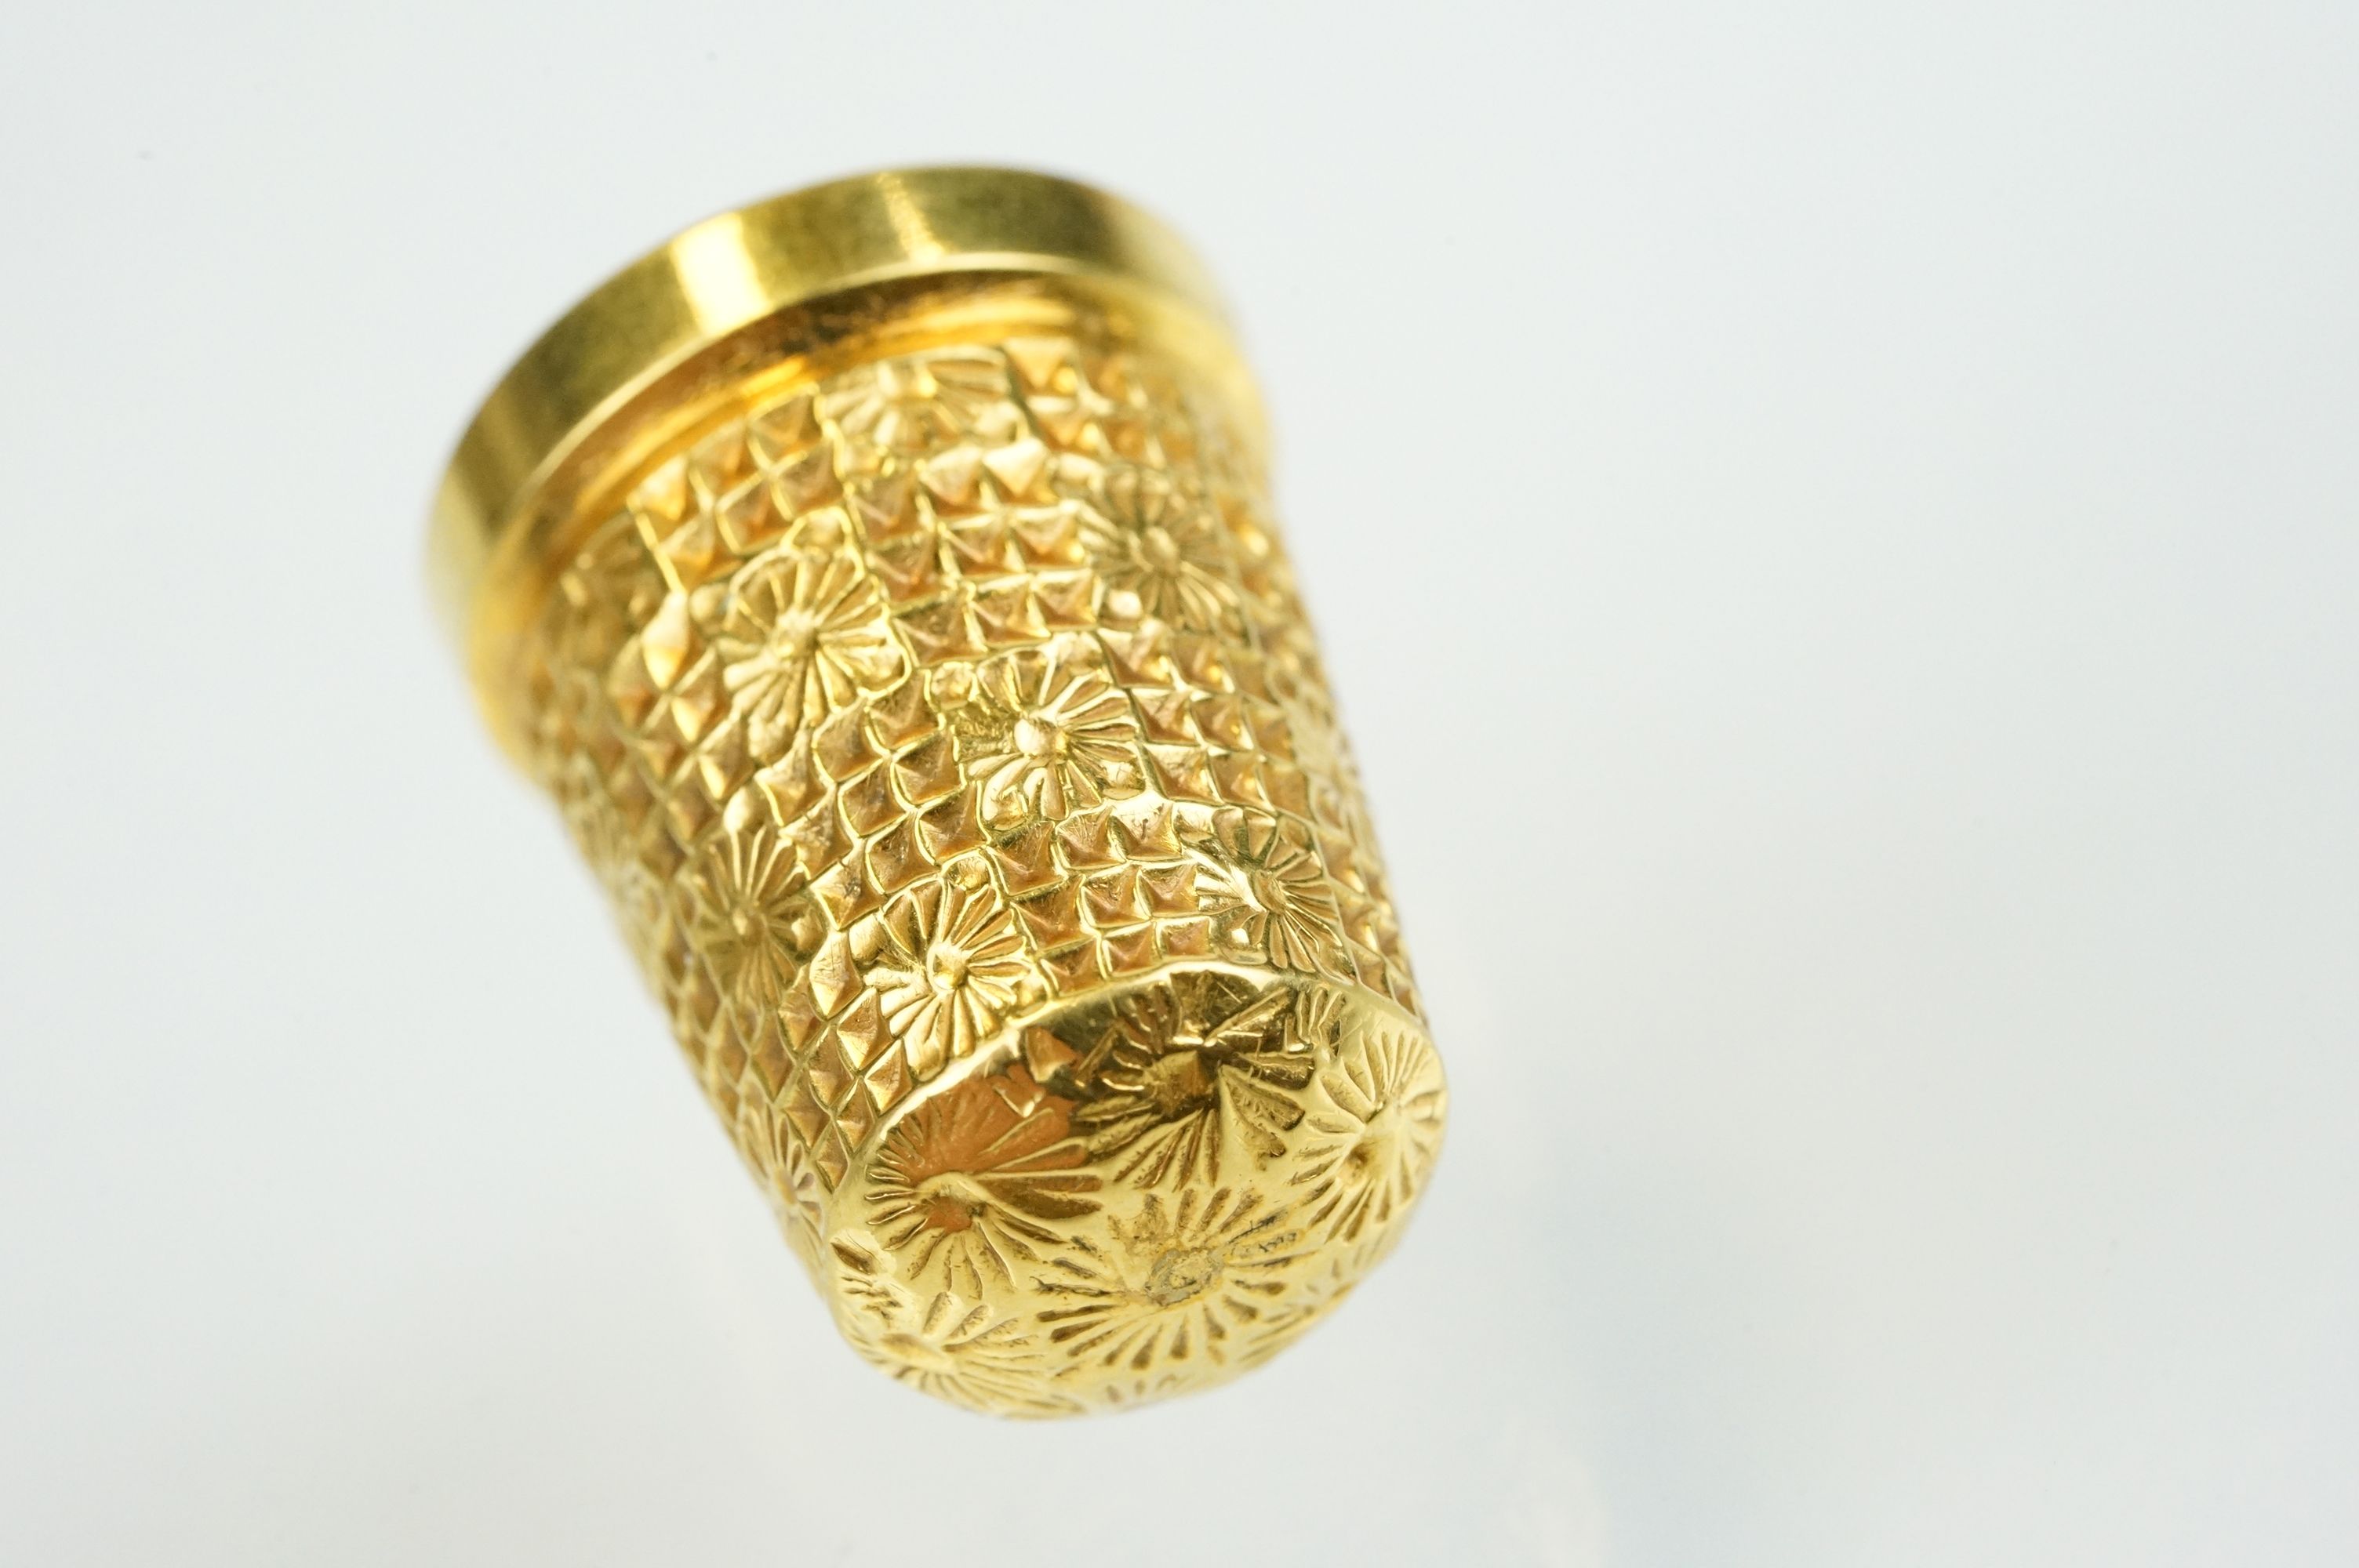 9ct gold hallmarked thimble with moulded details, size 15. Hallmarked Birmingham 1902, HG & S Ltd. - Image 3 of 4